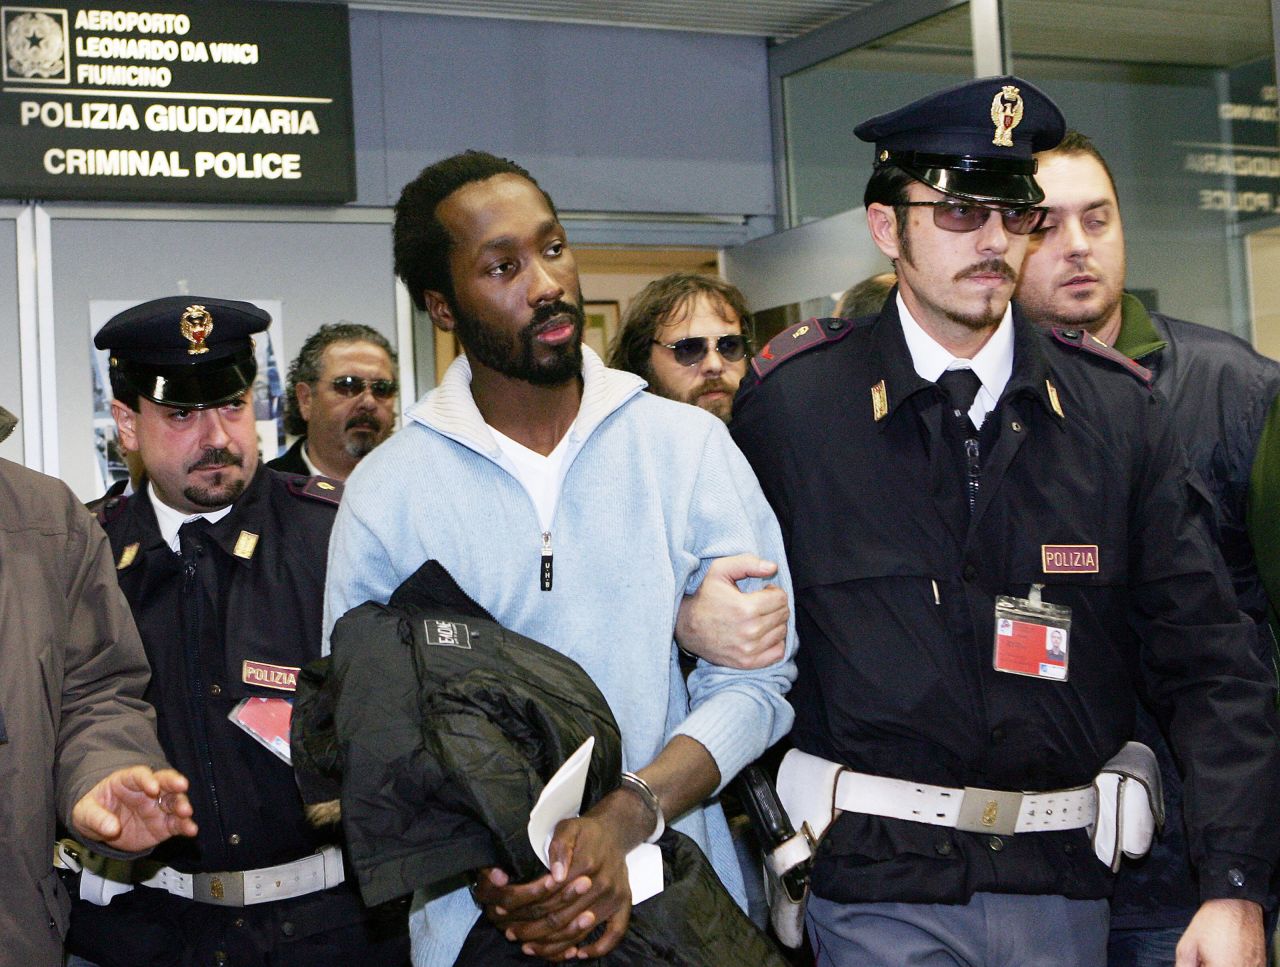 Rudy Hermann Guede, an Ivory Coast native raised in Perugia, was convicted separately from Knox and Sollecito and is now serving 16 years. Guede admitted to being with Kercher on the night she died, but said he didn't kill her. Both Knox and Sollecito argued that he was the killer, and Guede suggested the couple took Kercher's life.